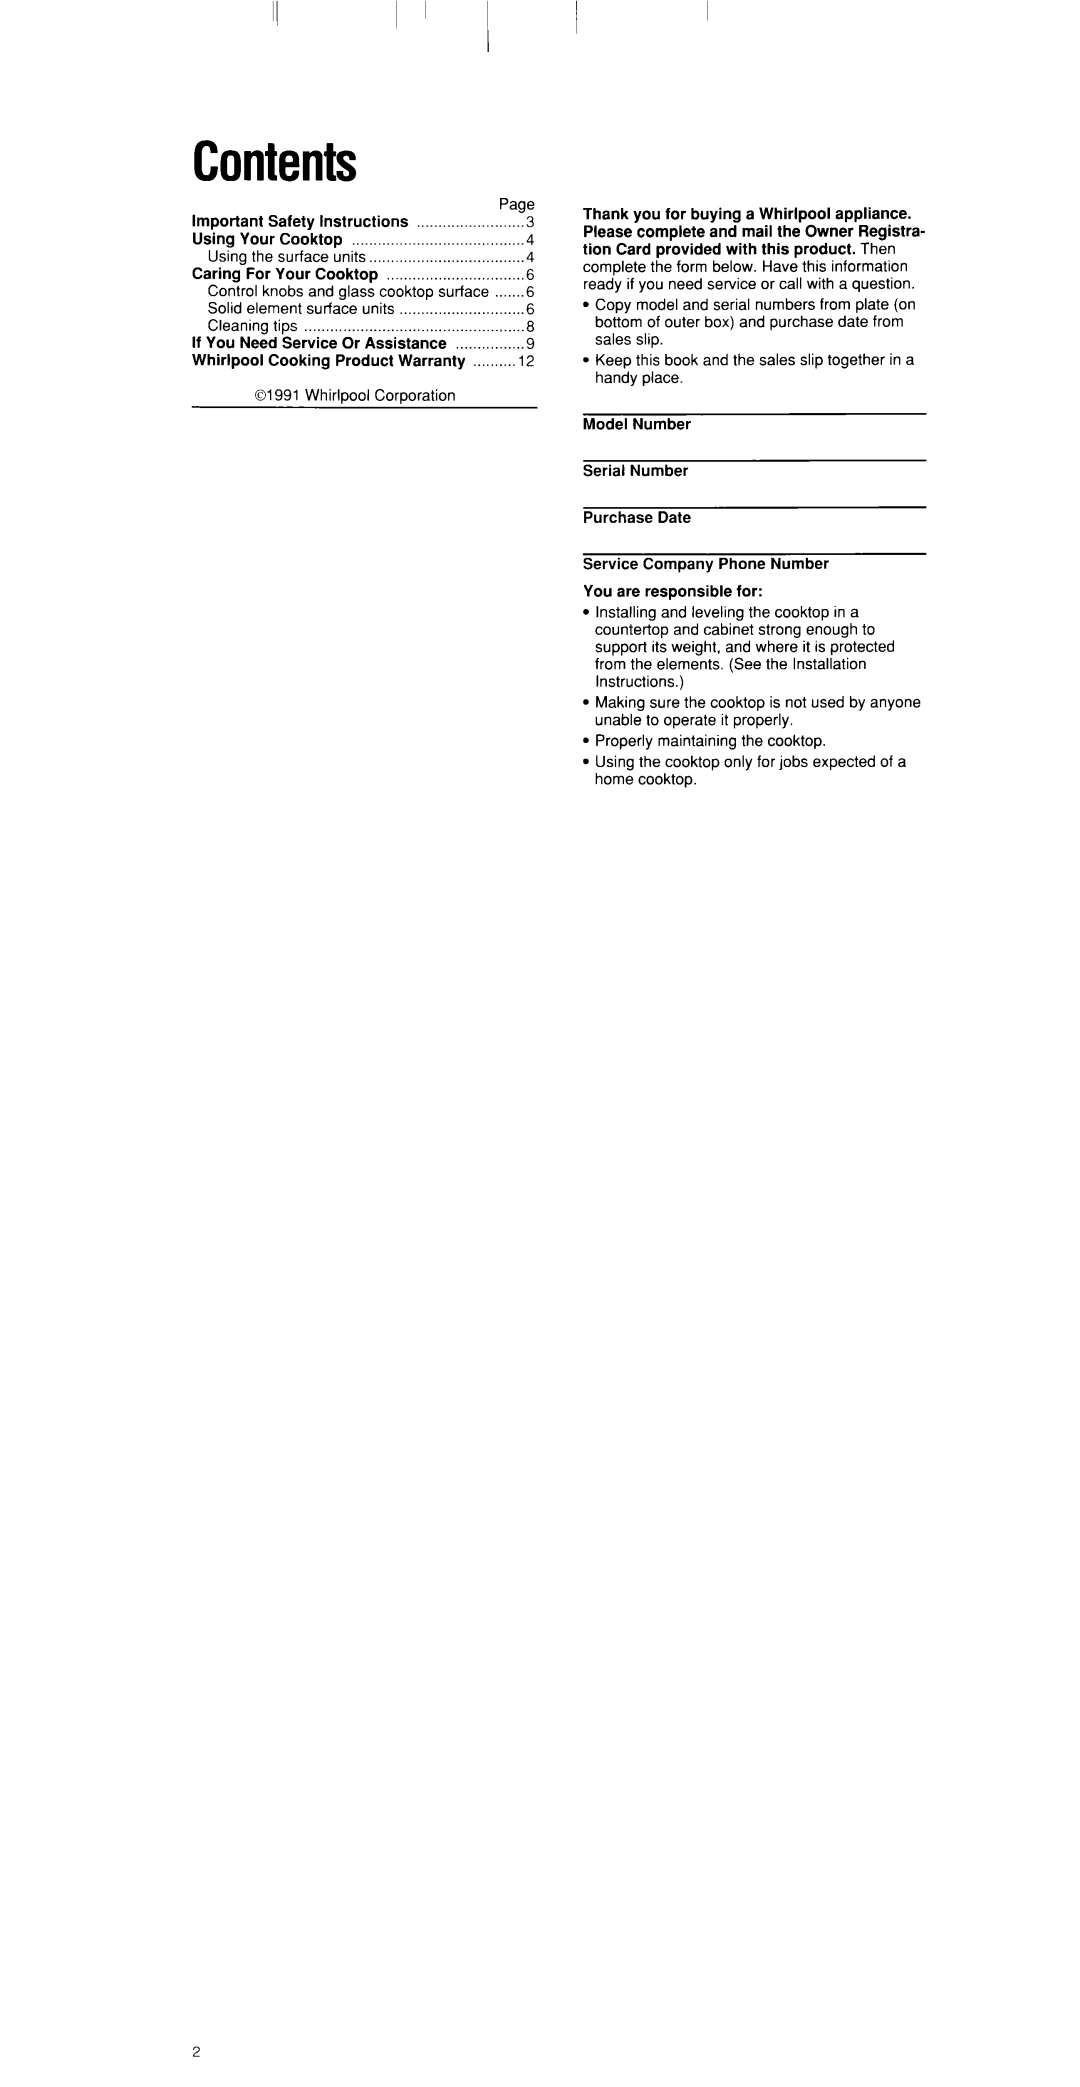 Whirlpool RC8330XT manual Contents 